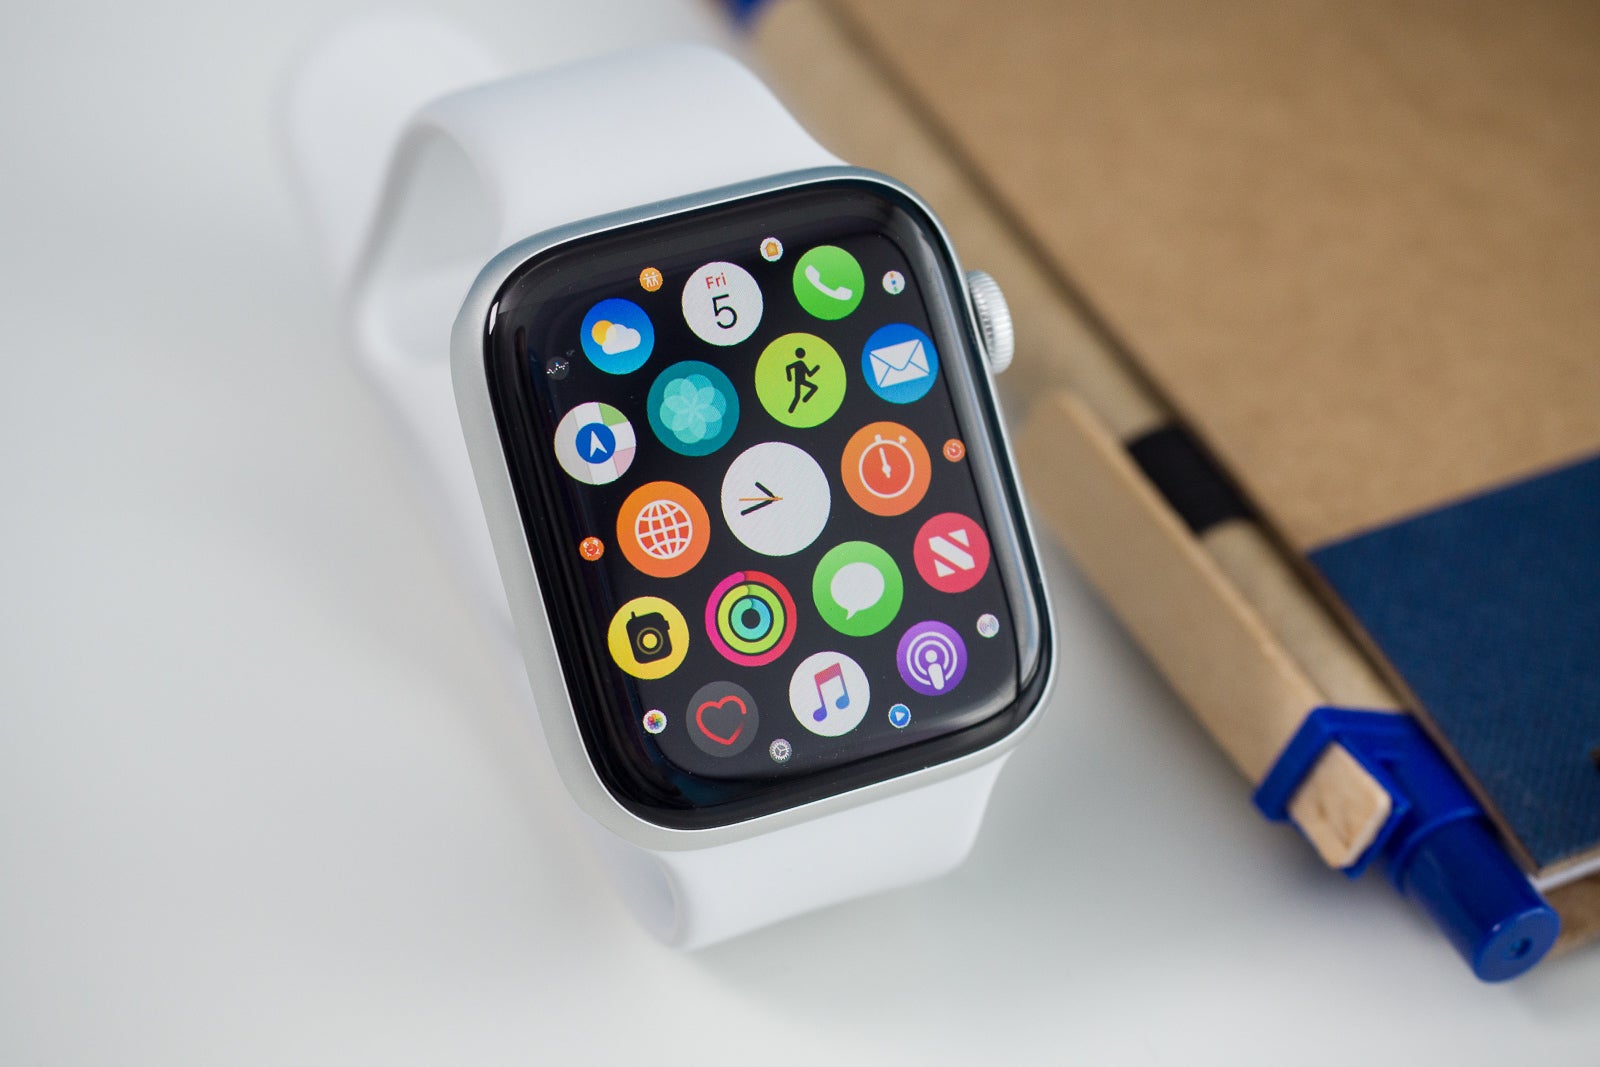 The Apple Watch has always used OLED displays - Future iPhones could carry next-gen display tech developed by Foxconn